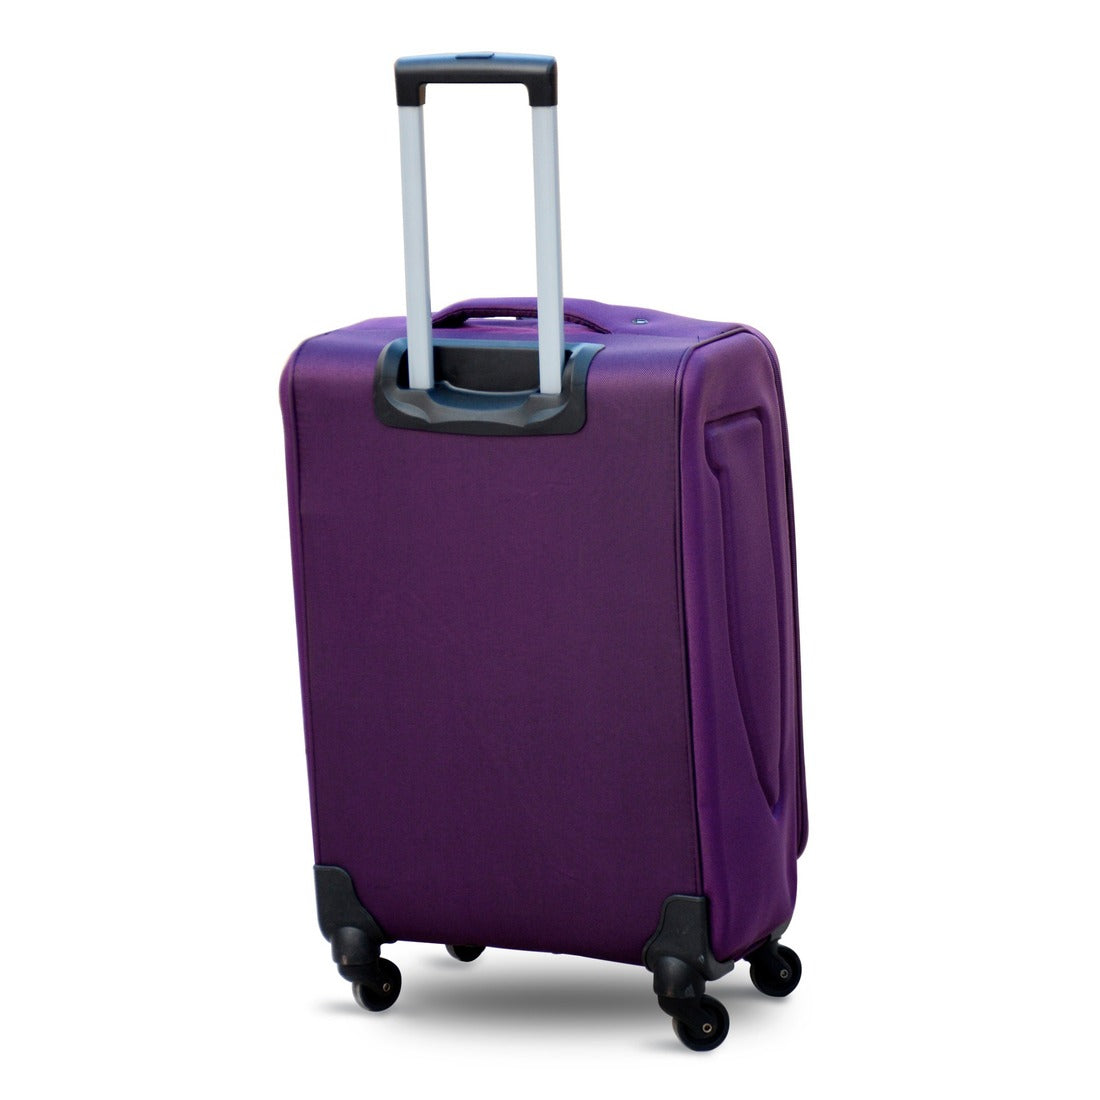 Soft Material Luggage Lightweight Soft Shell - 20 Inches 10 Kg Capacity MEGA SALE